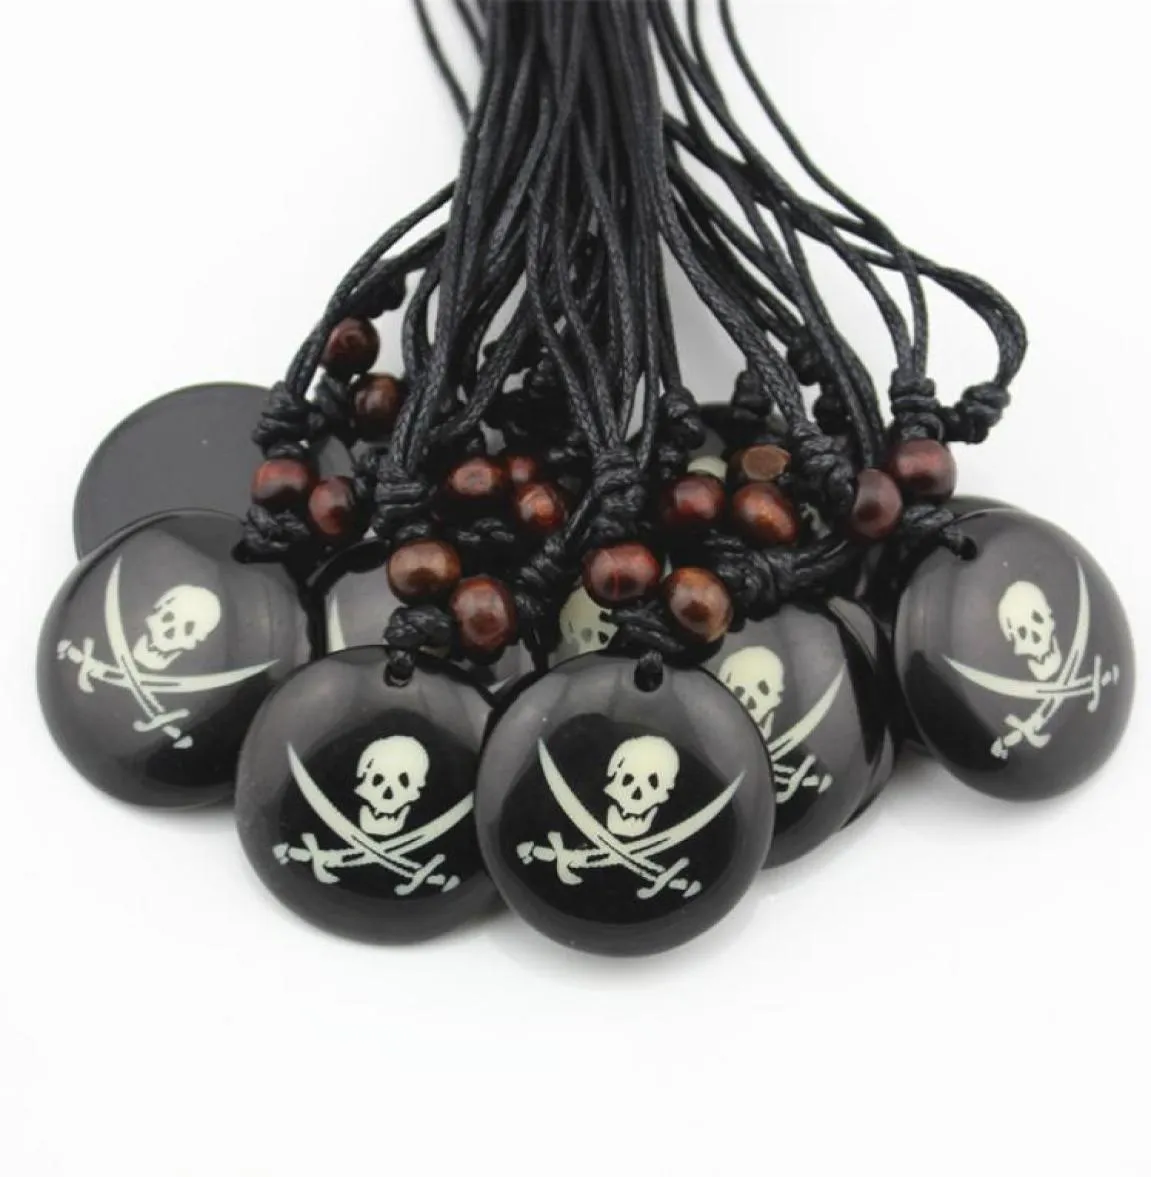 Fashion Whole lot 12pcsLOT Cool Boy Men039s Handmade Round Dog Pirate Skull Charm Pendants Necklace Halloween Gift MN37834230